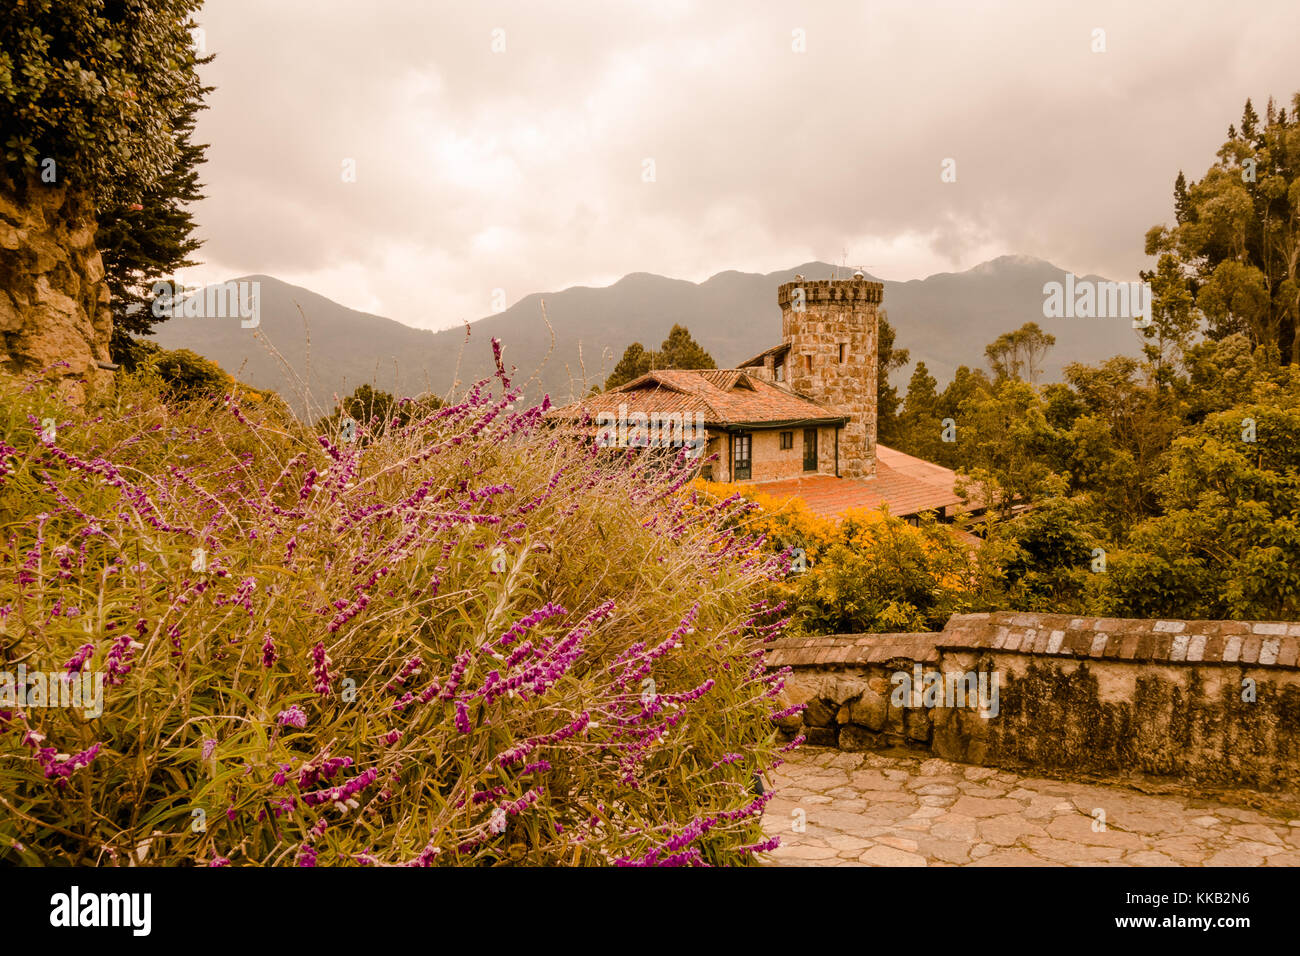 Beautiful ancient building in Monserrate, Bogota Colombia Stock Photo